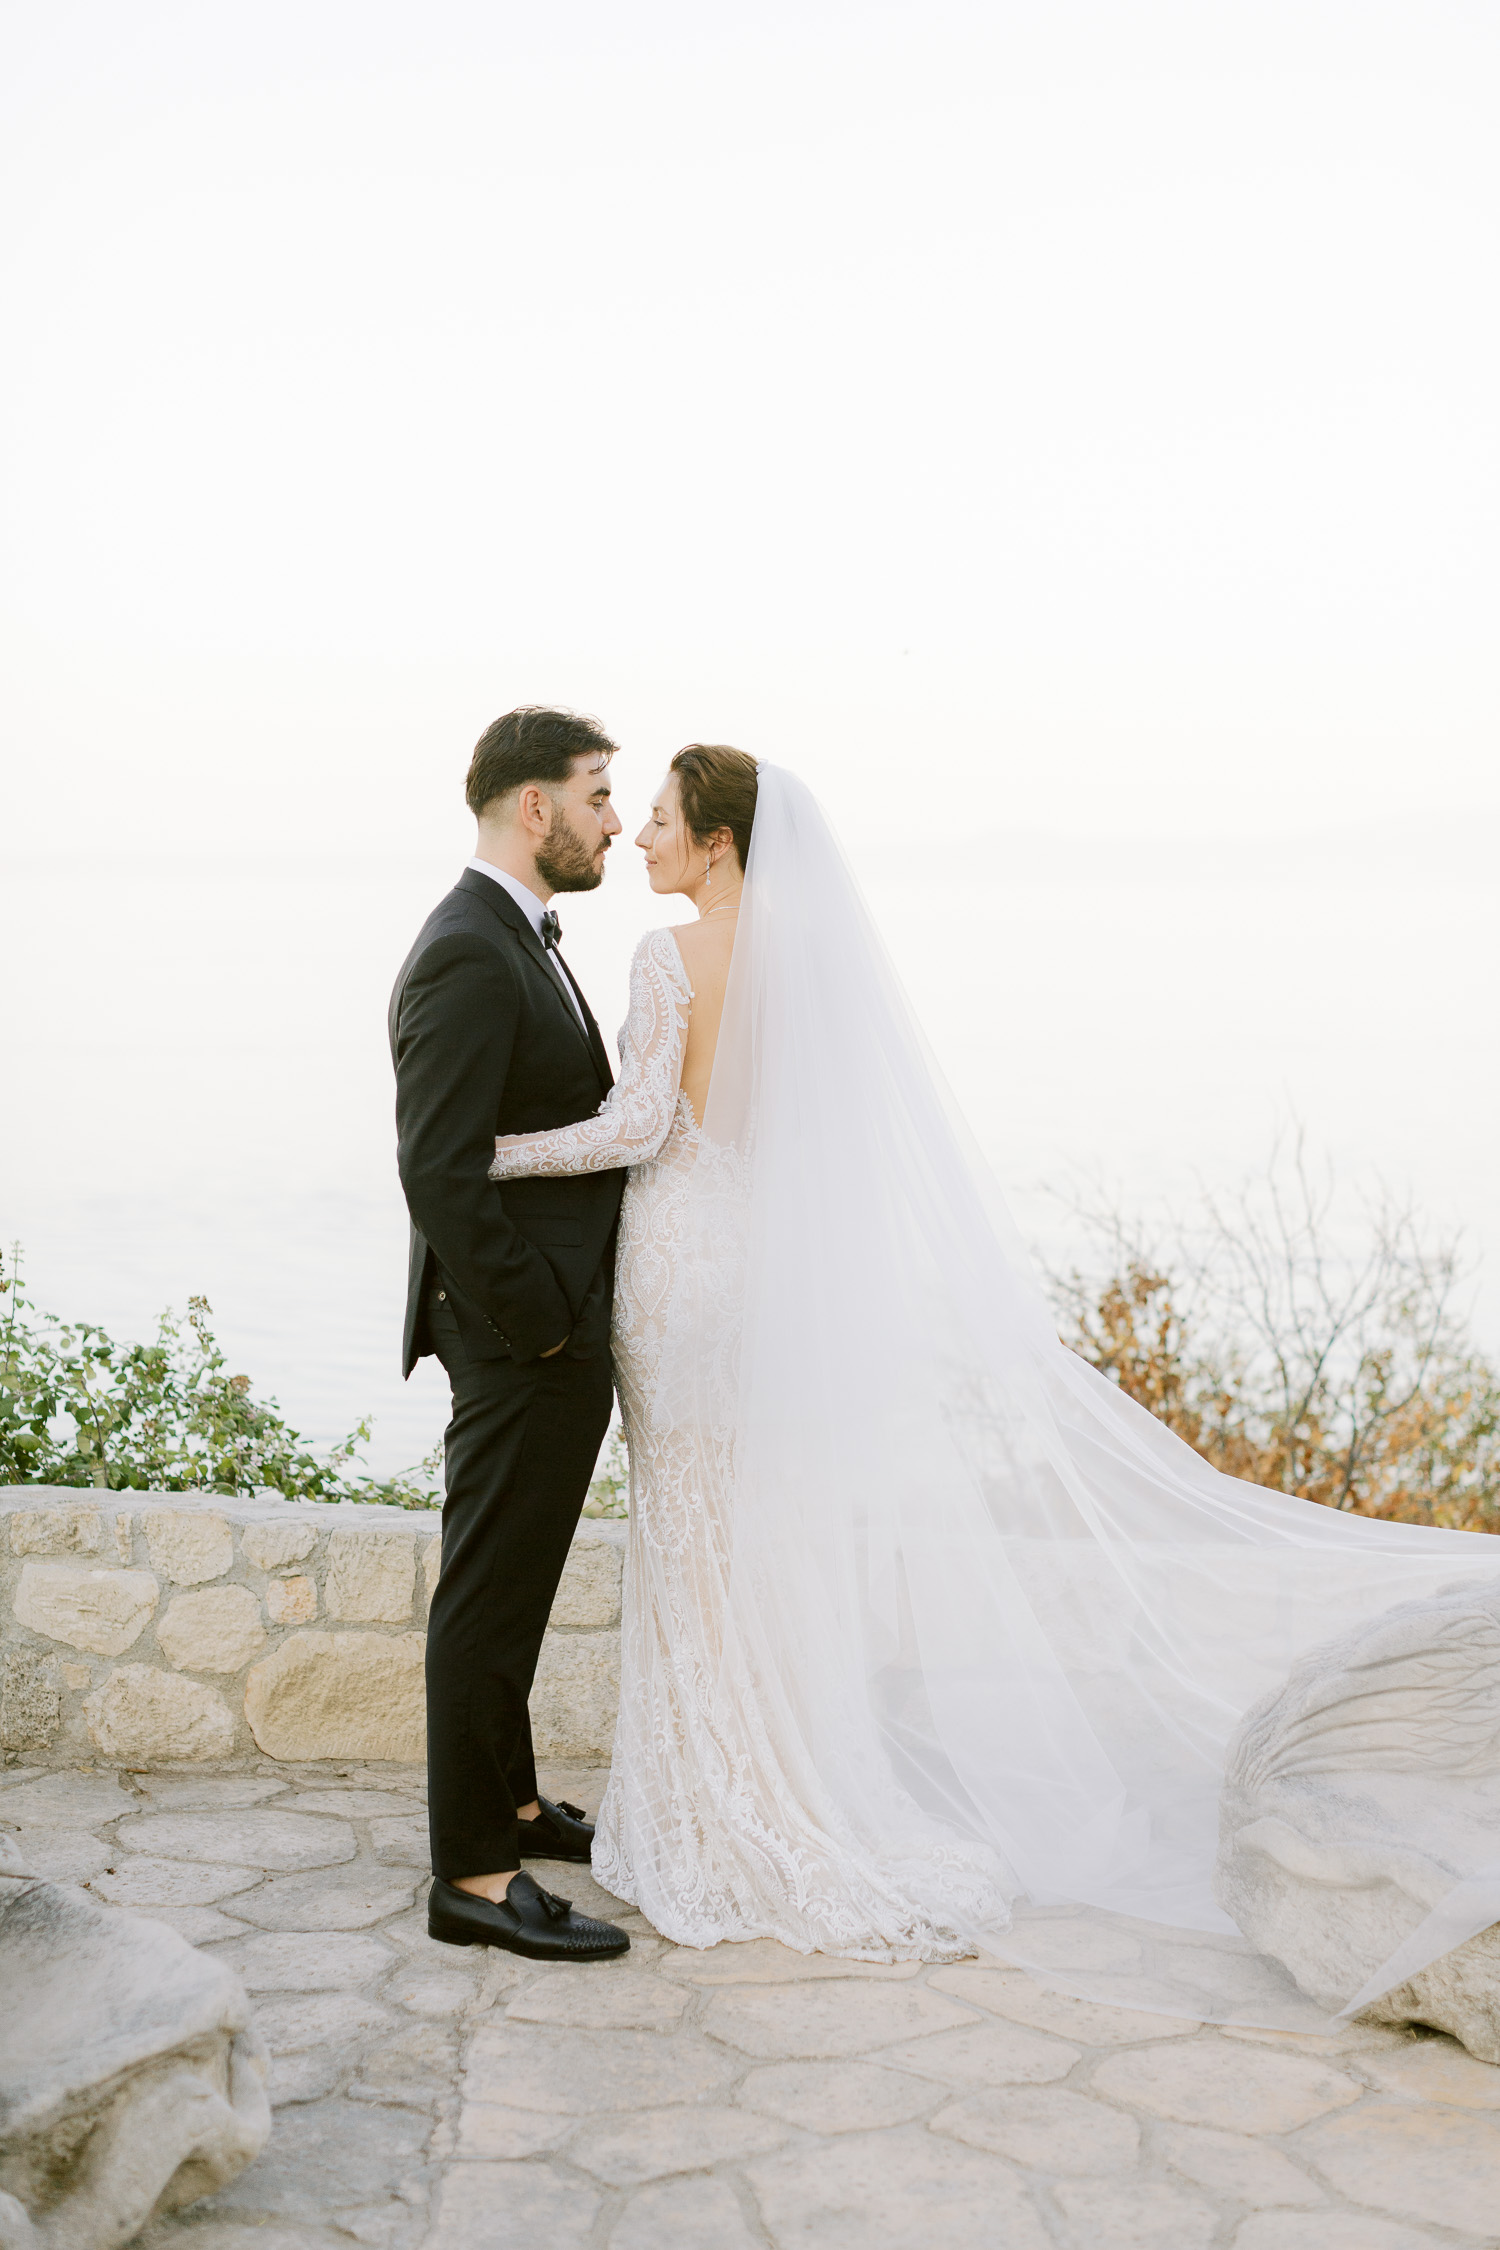 Bride and groom post wedding portrait at a chic micro wedding in Greece